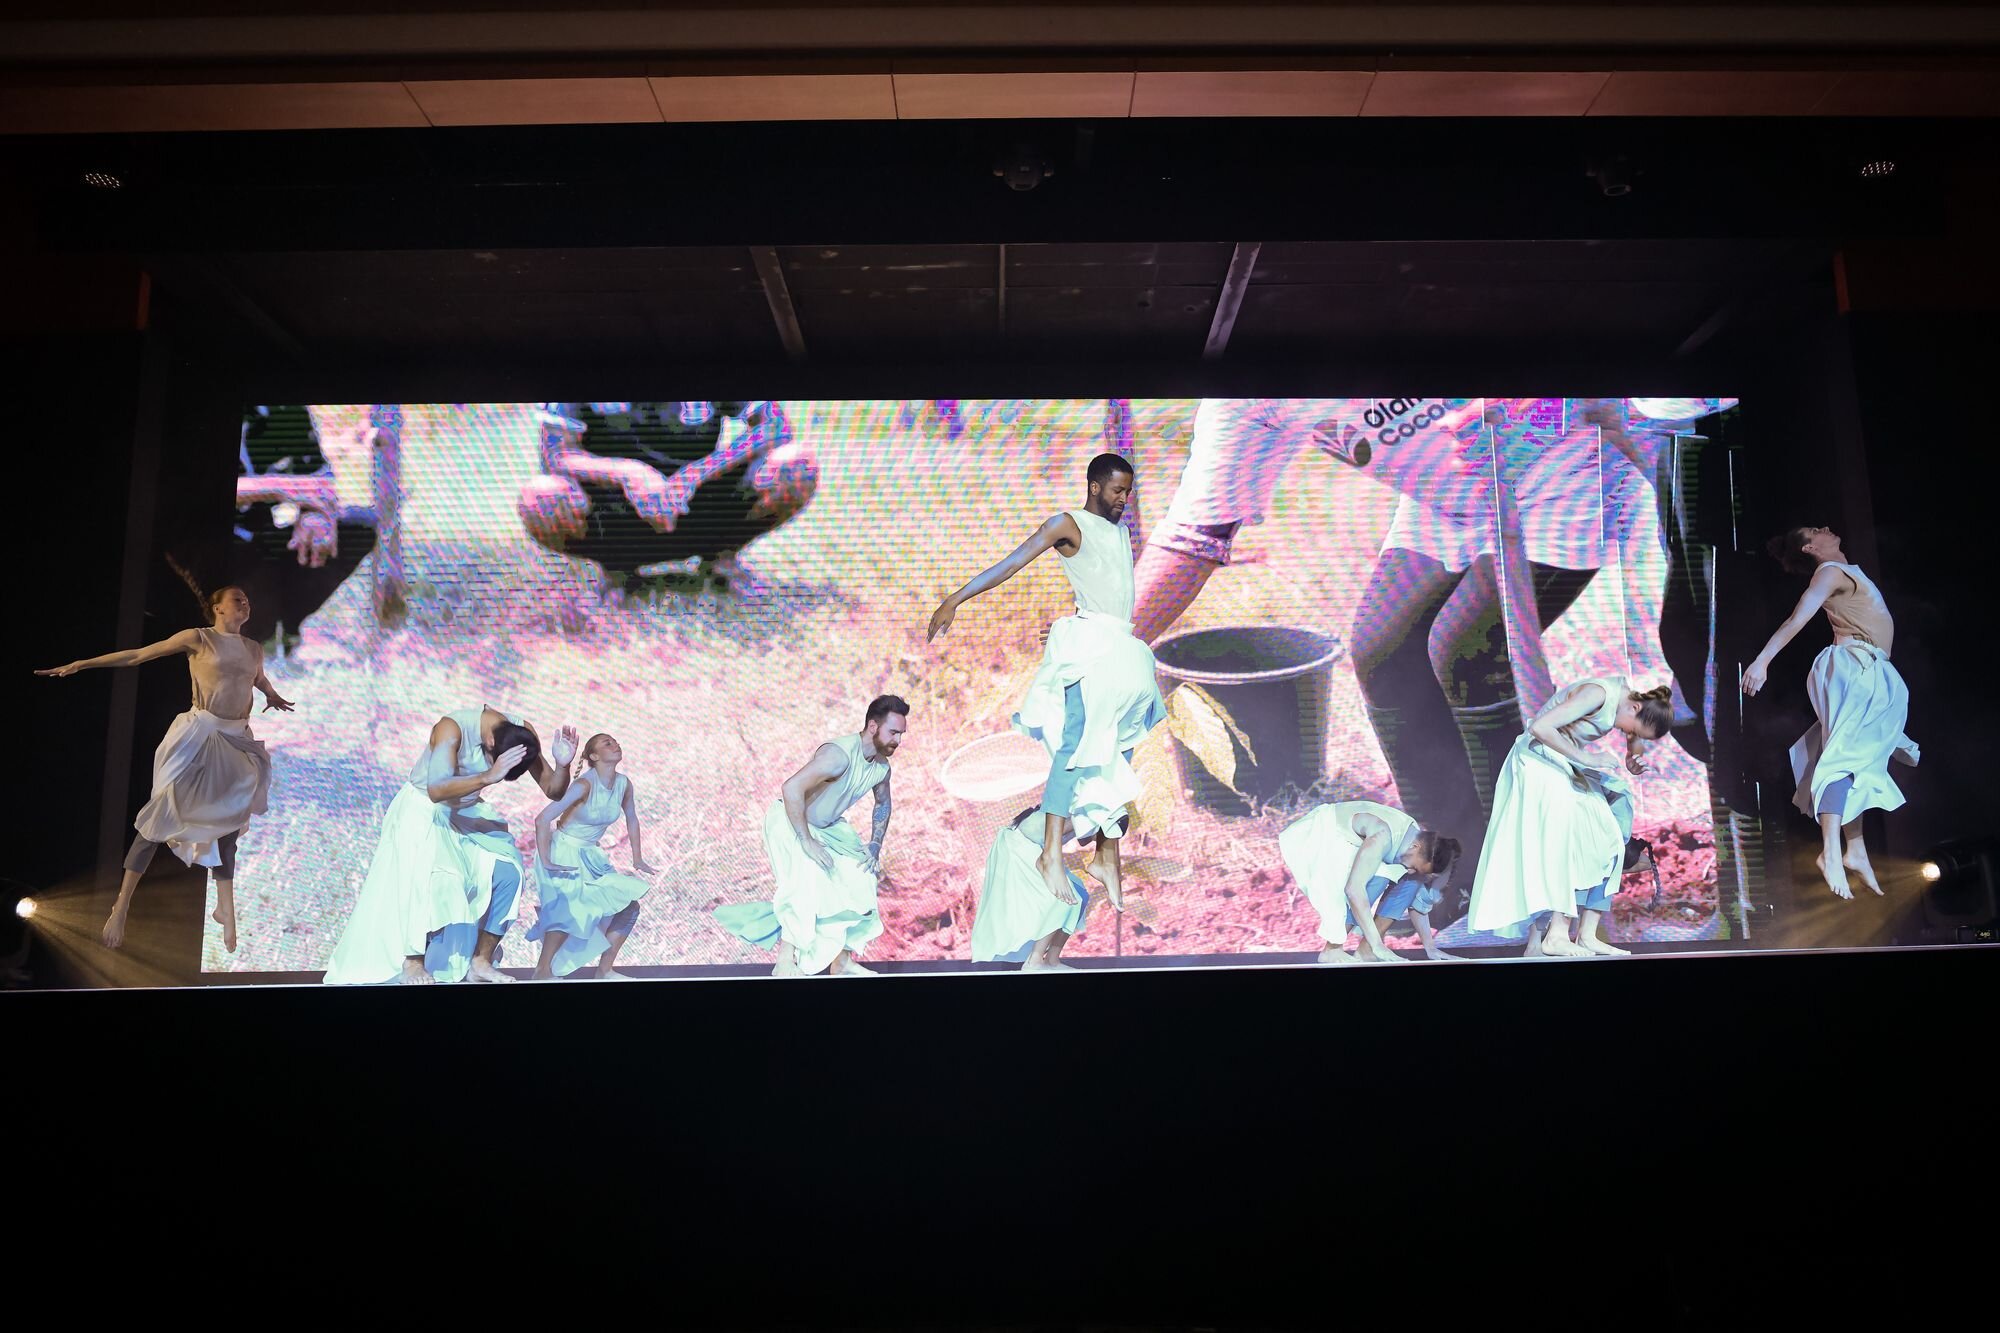  10 dancers dressed in flowing white garments are placed across a wide stage in front of a screen showing images of earth. They are in various states of jumping high into the air. 